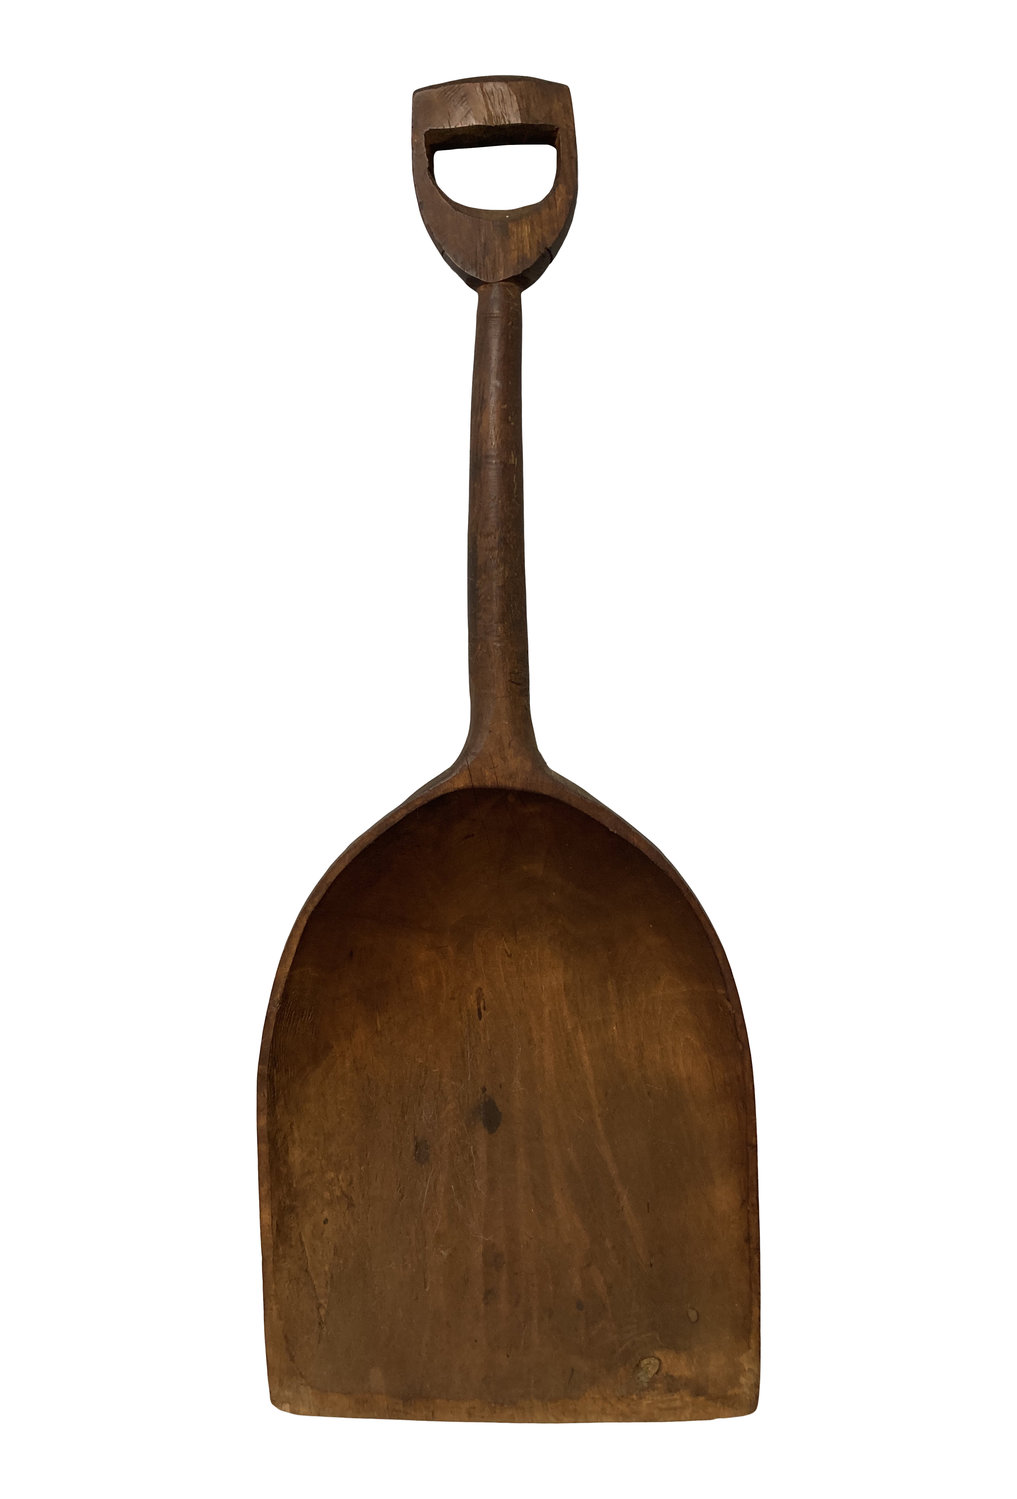 A 19th Century wooden shovel fashioned by a “scooper.”